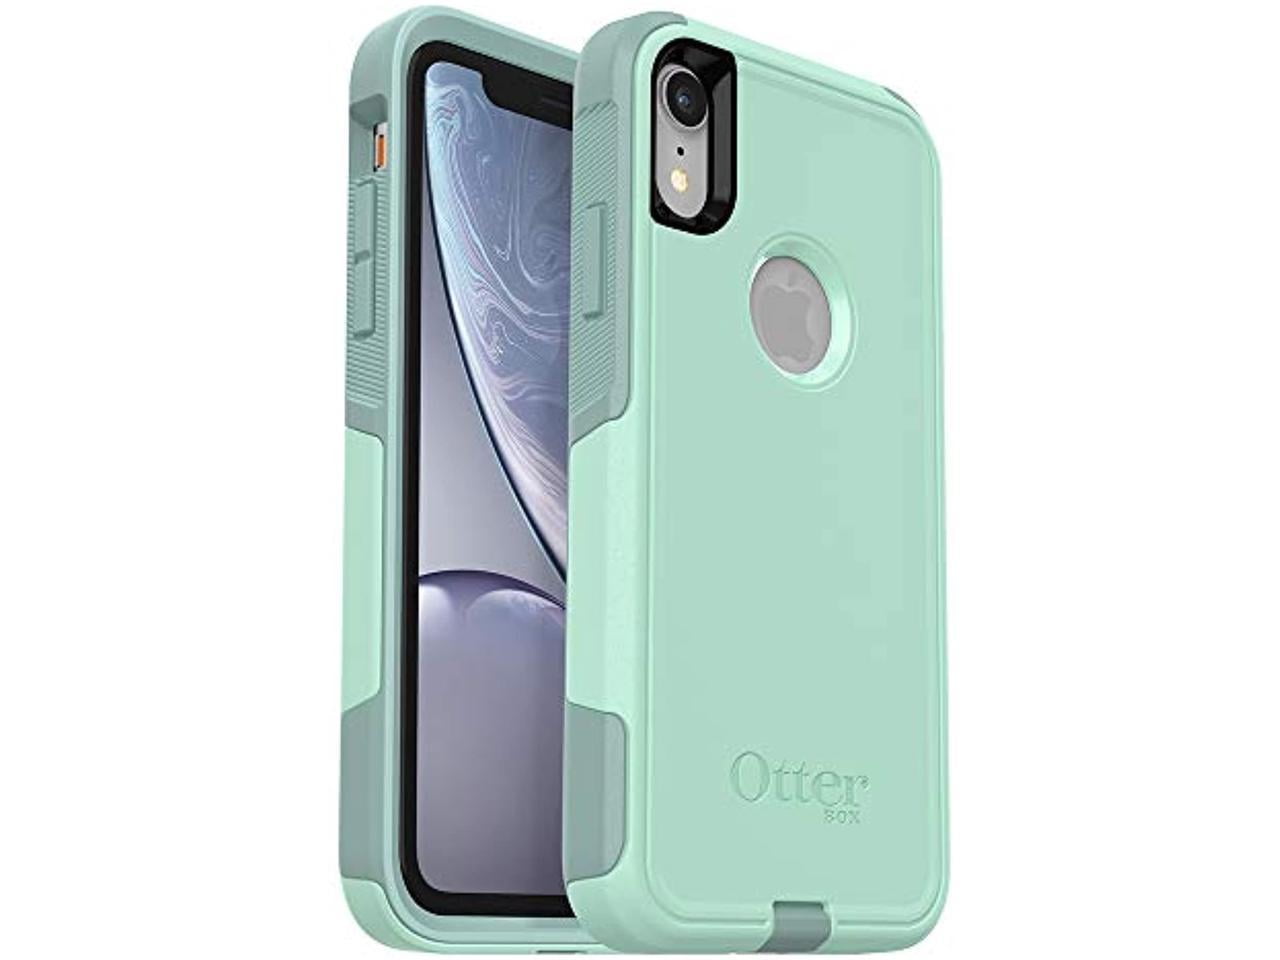 outterbox phone cases